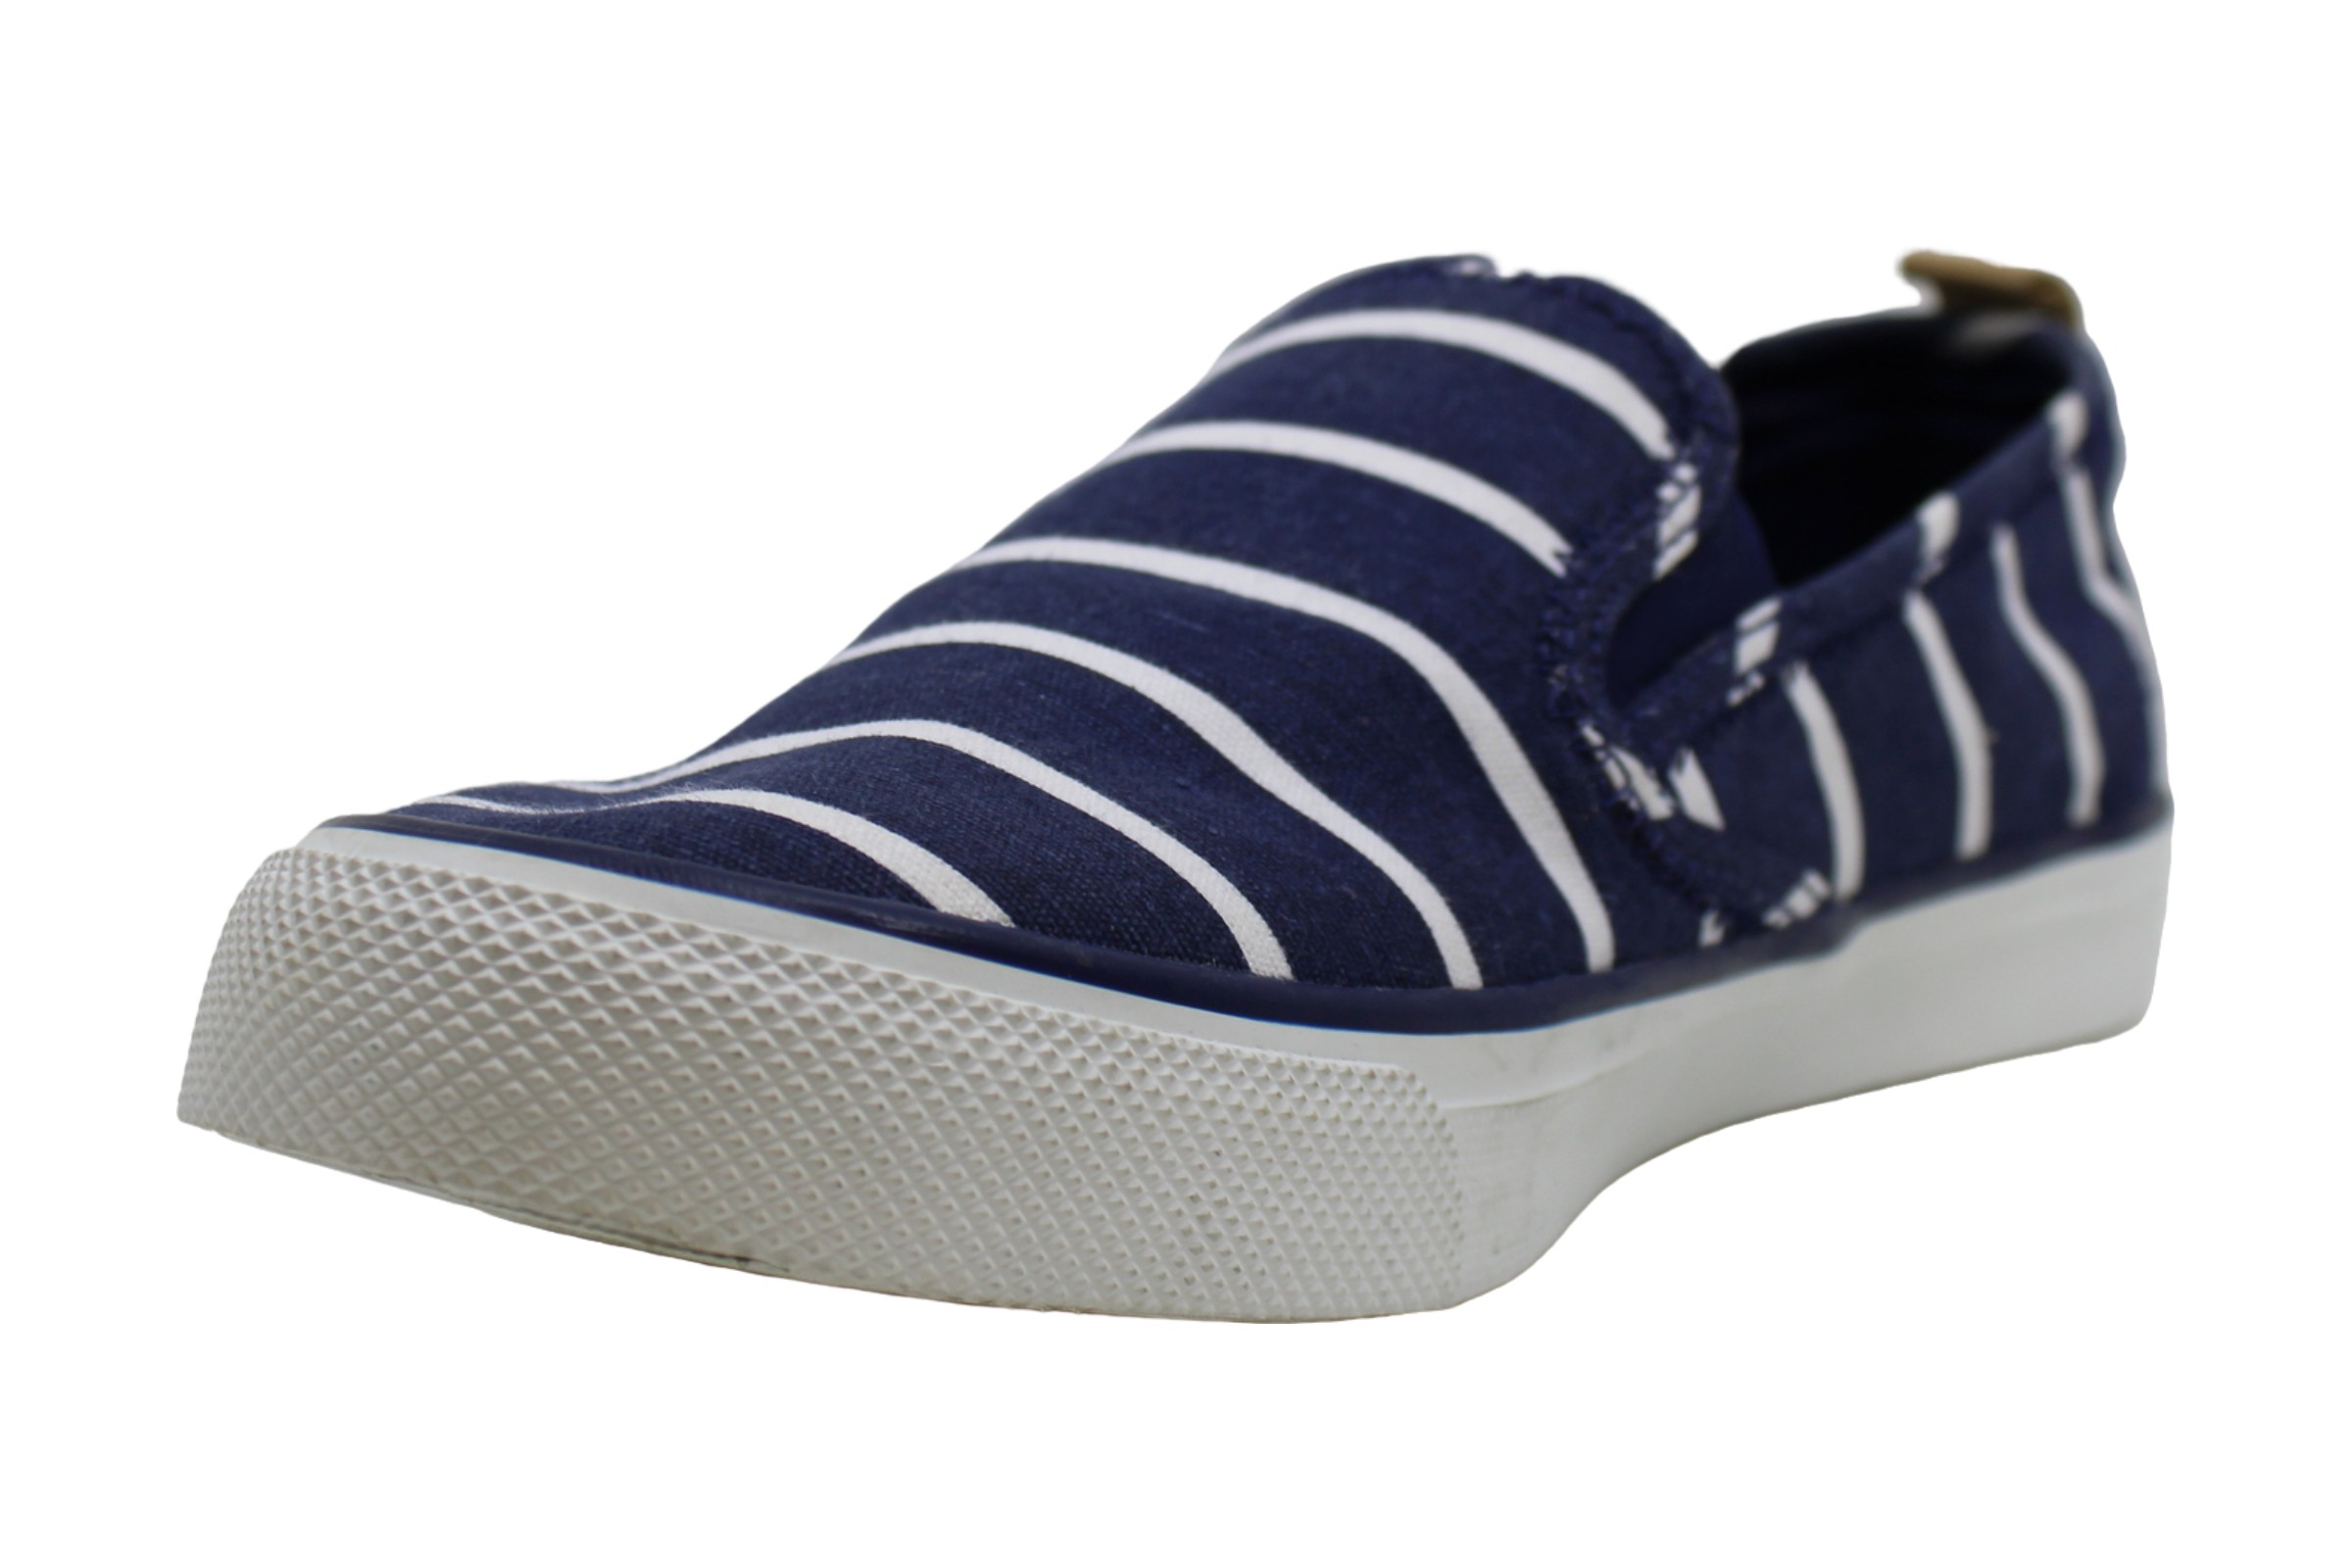 Sperry Womens seaside canvas Fabric Low Top Slip On, Navy/white, Size 6 ...